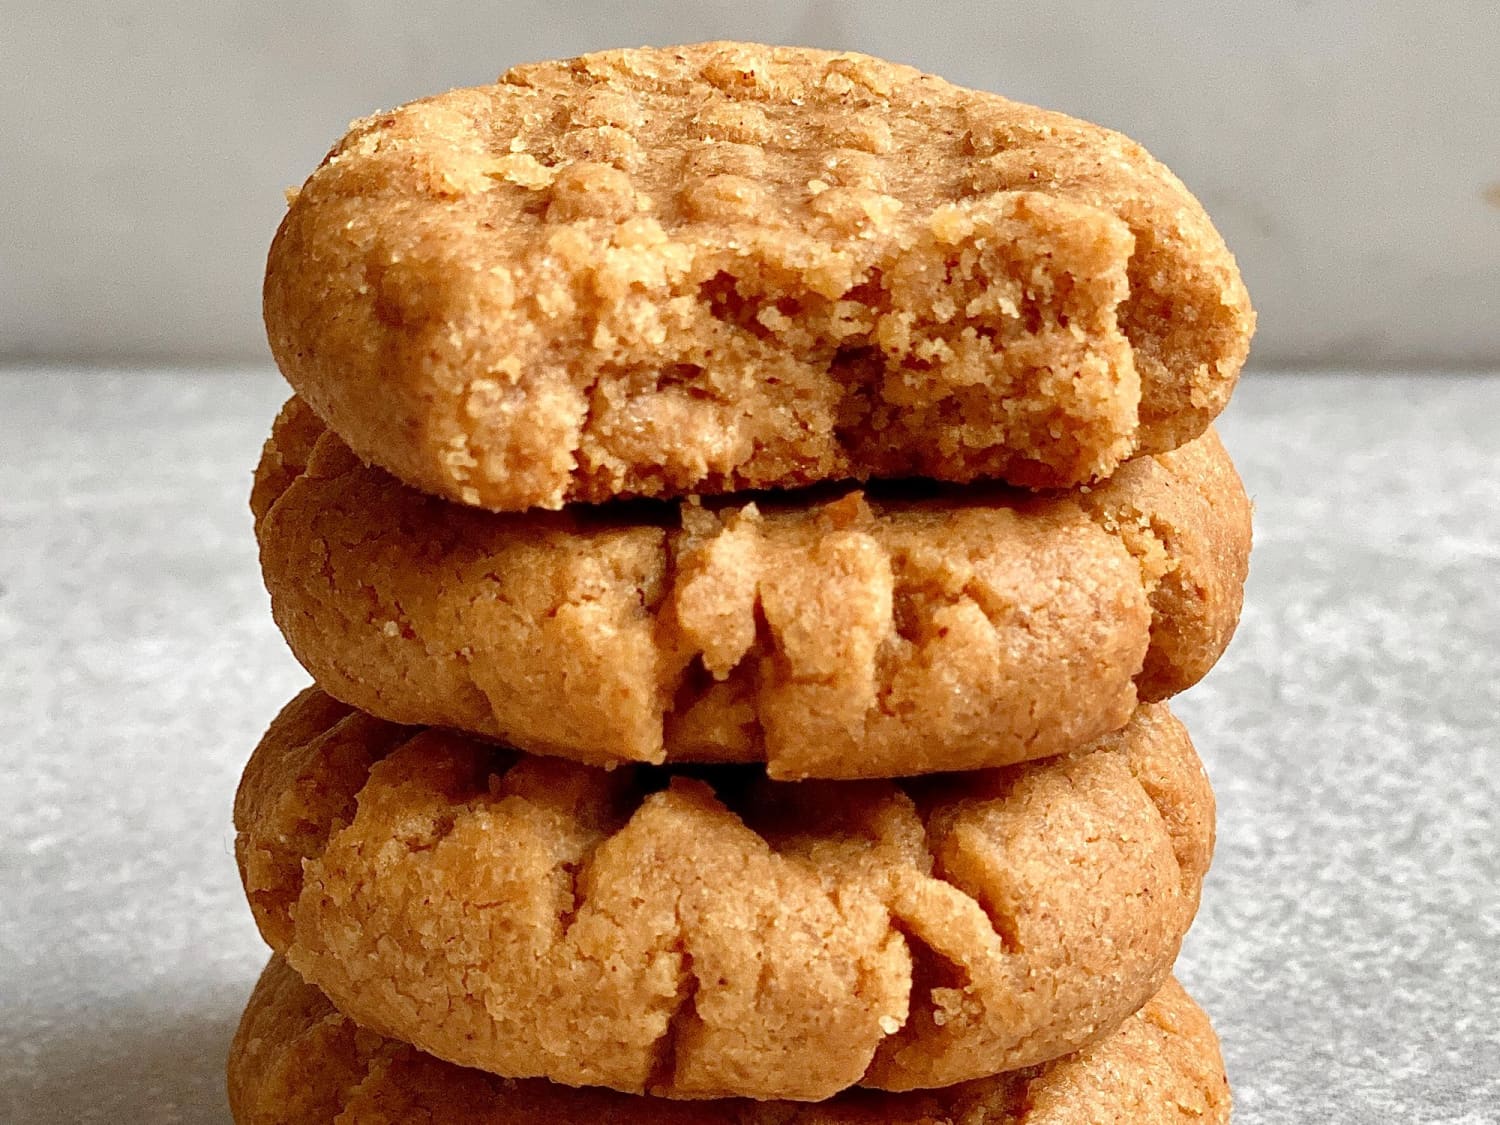 These 3-Ingredient Peanut Butter Cookies Break All the Rules — Which Is Why They’re So Dangerously Delicious